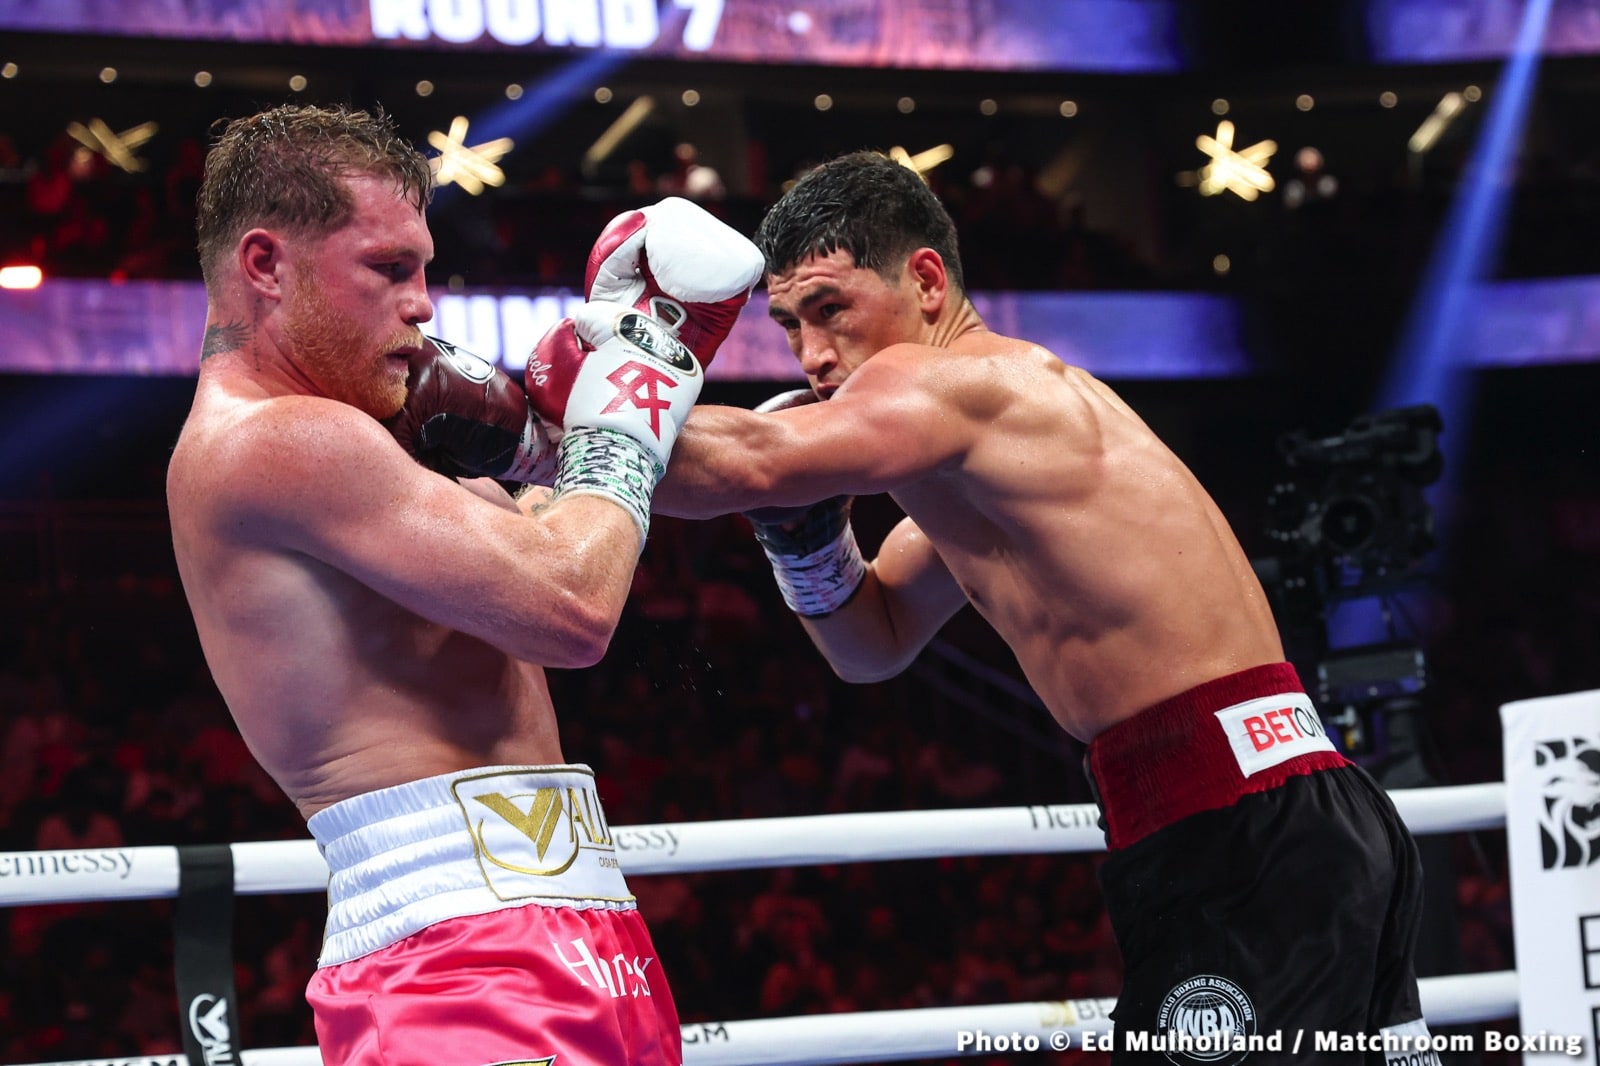 Image: "Canelo wins the rematch' with Bivol says Shawn Porter